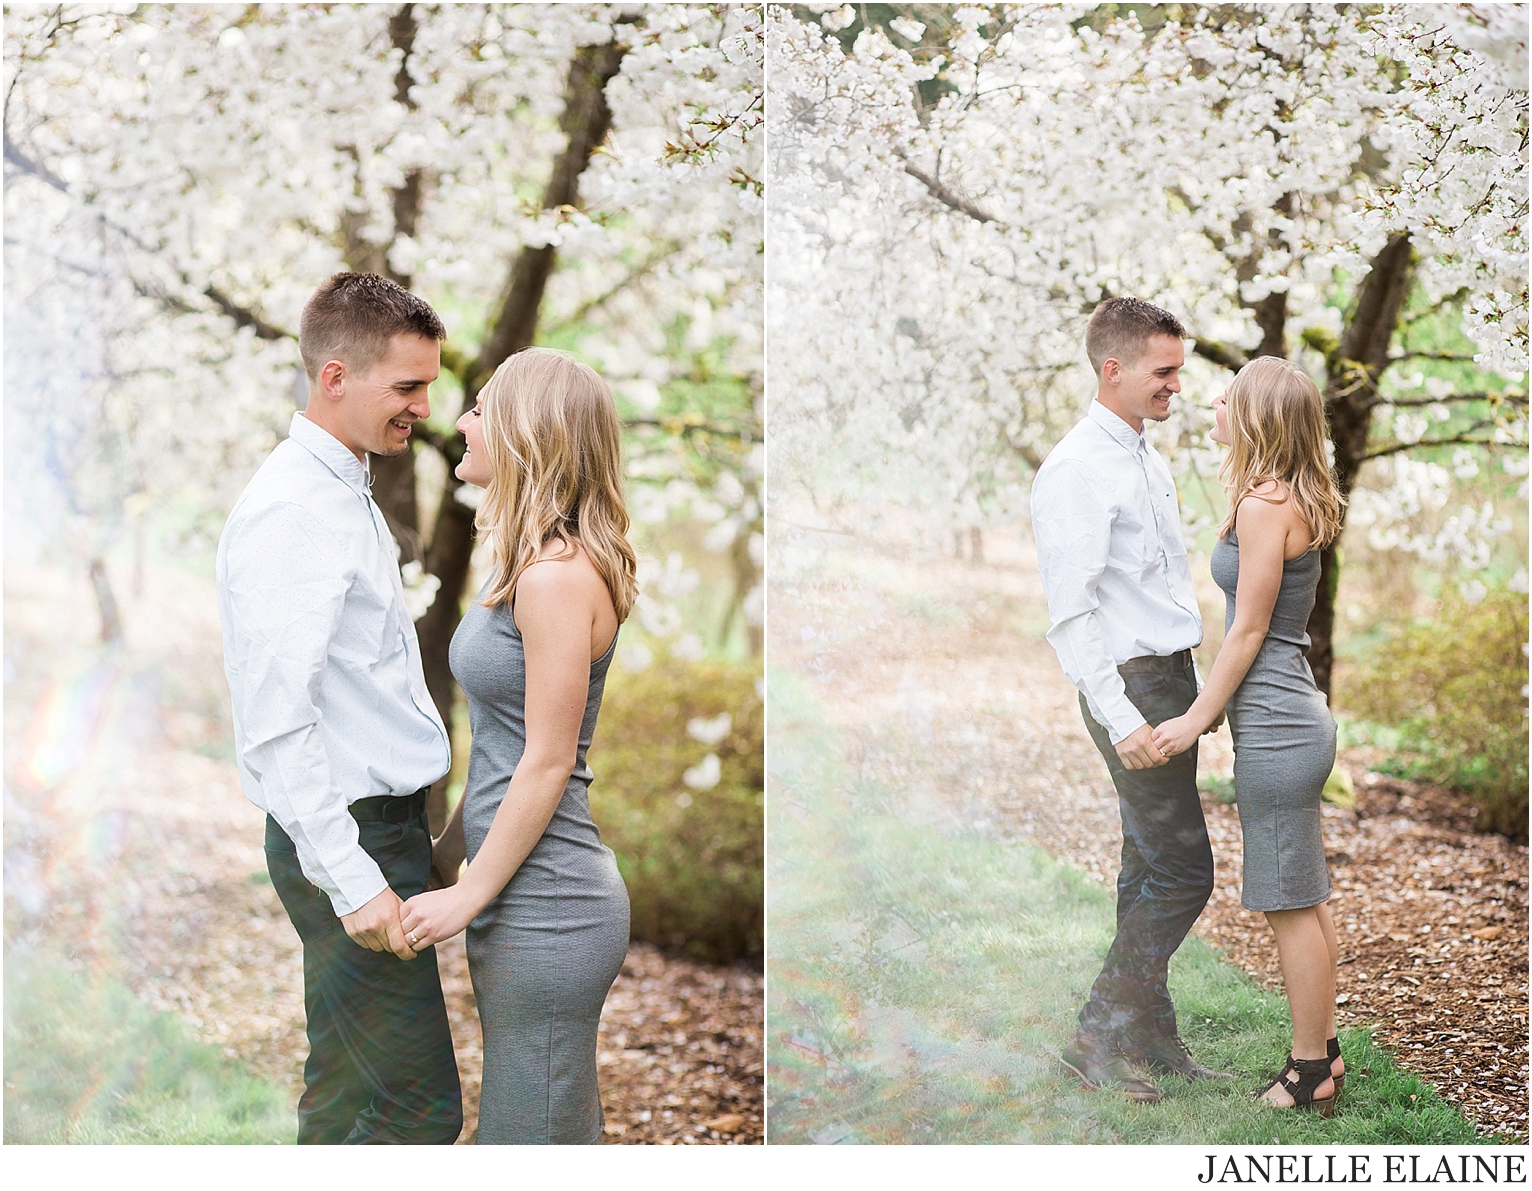 tricia and nate engagement photos-janelle elaine photography-98.jpg